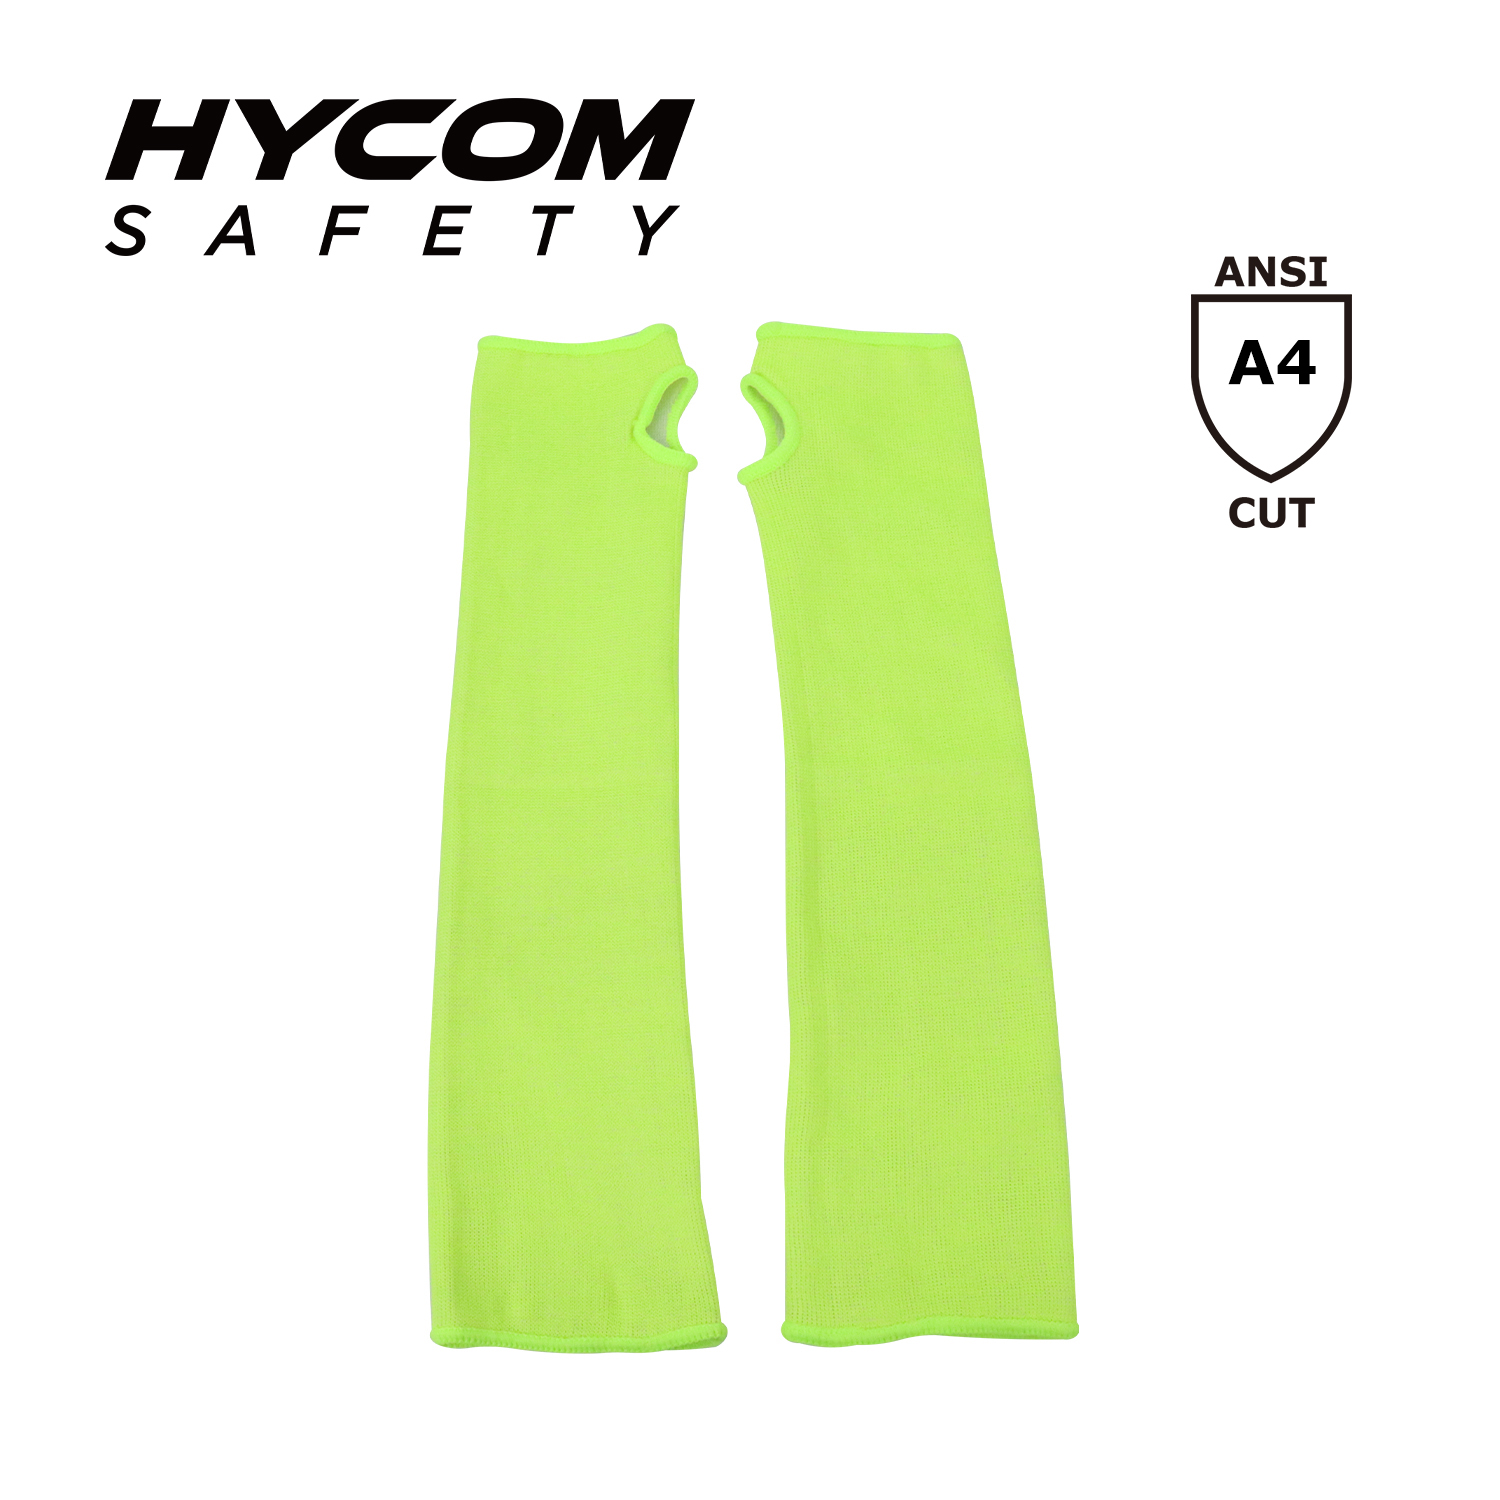 HYCOM Cut Level 4 Green Cut Resistant Arm Cover Sleeve with Thumb Slot For Work Safety